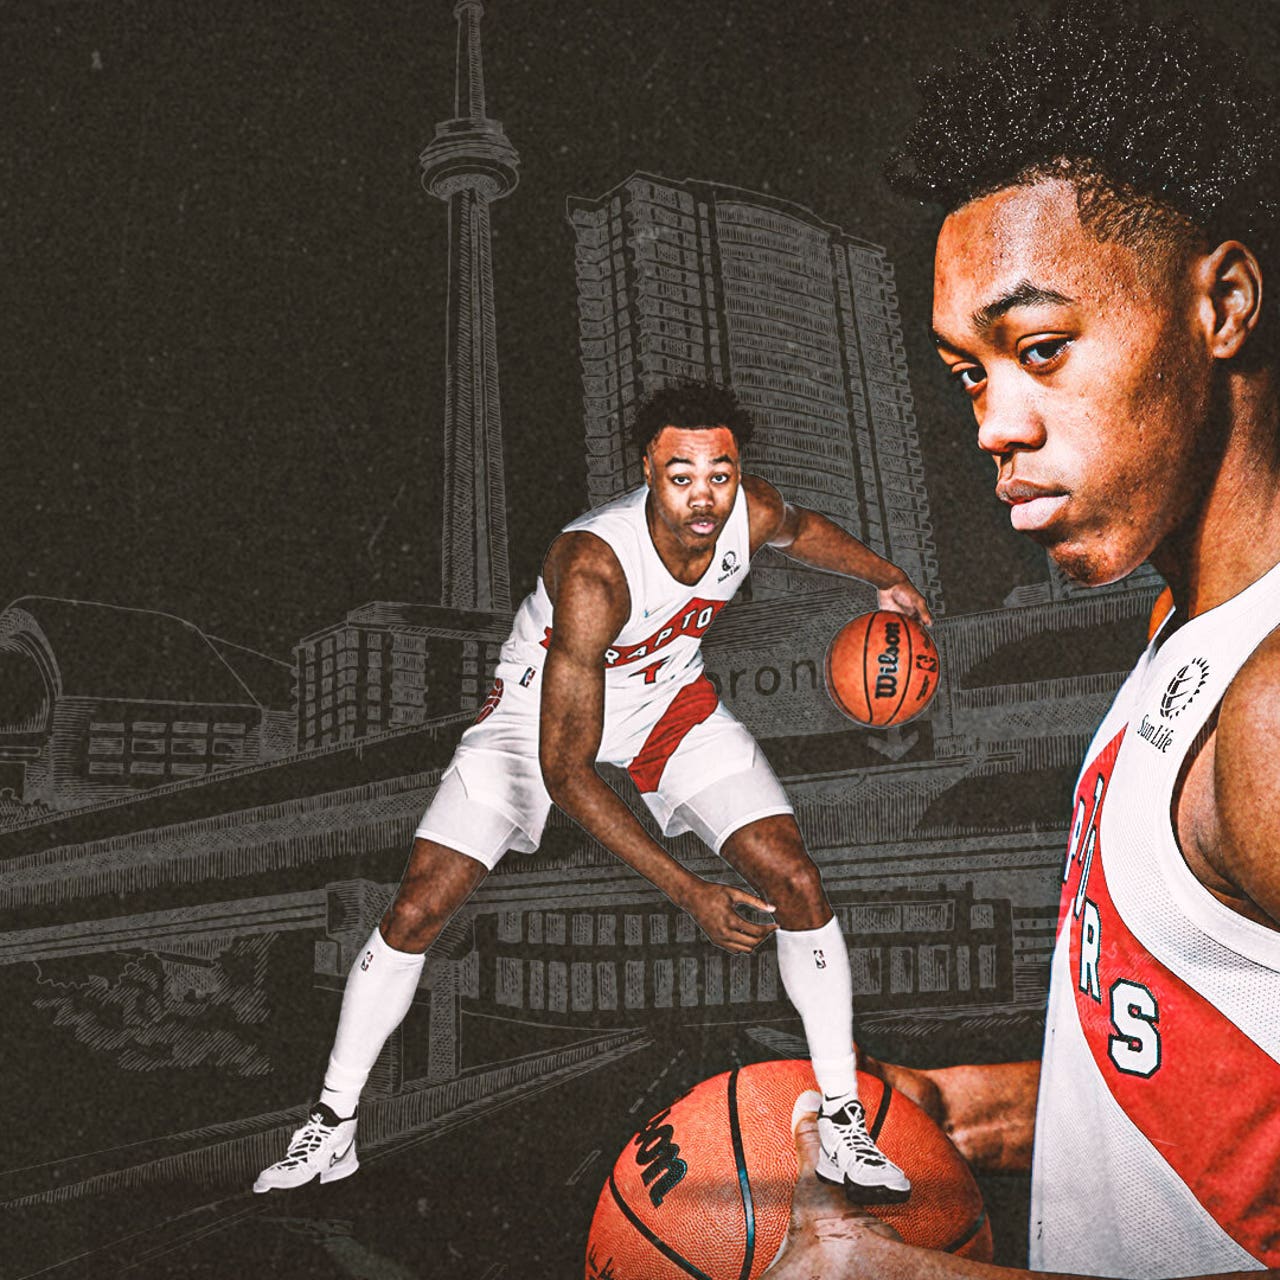 Toronto Raptors: Scottie Barnes Rookie of the Year odds are solid